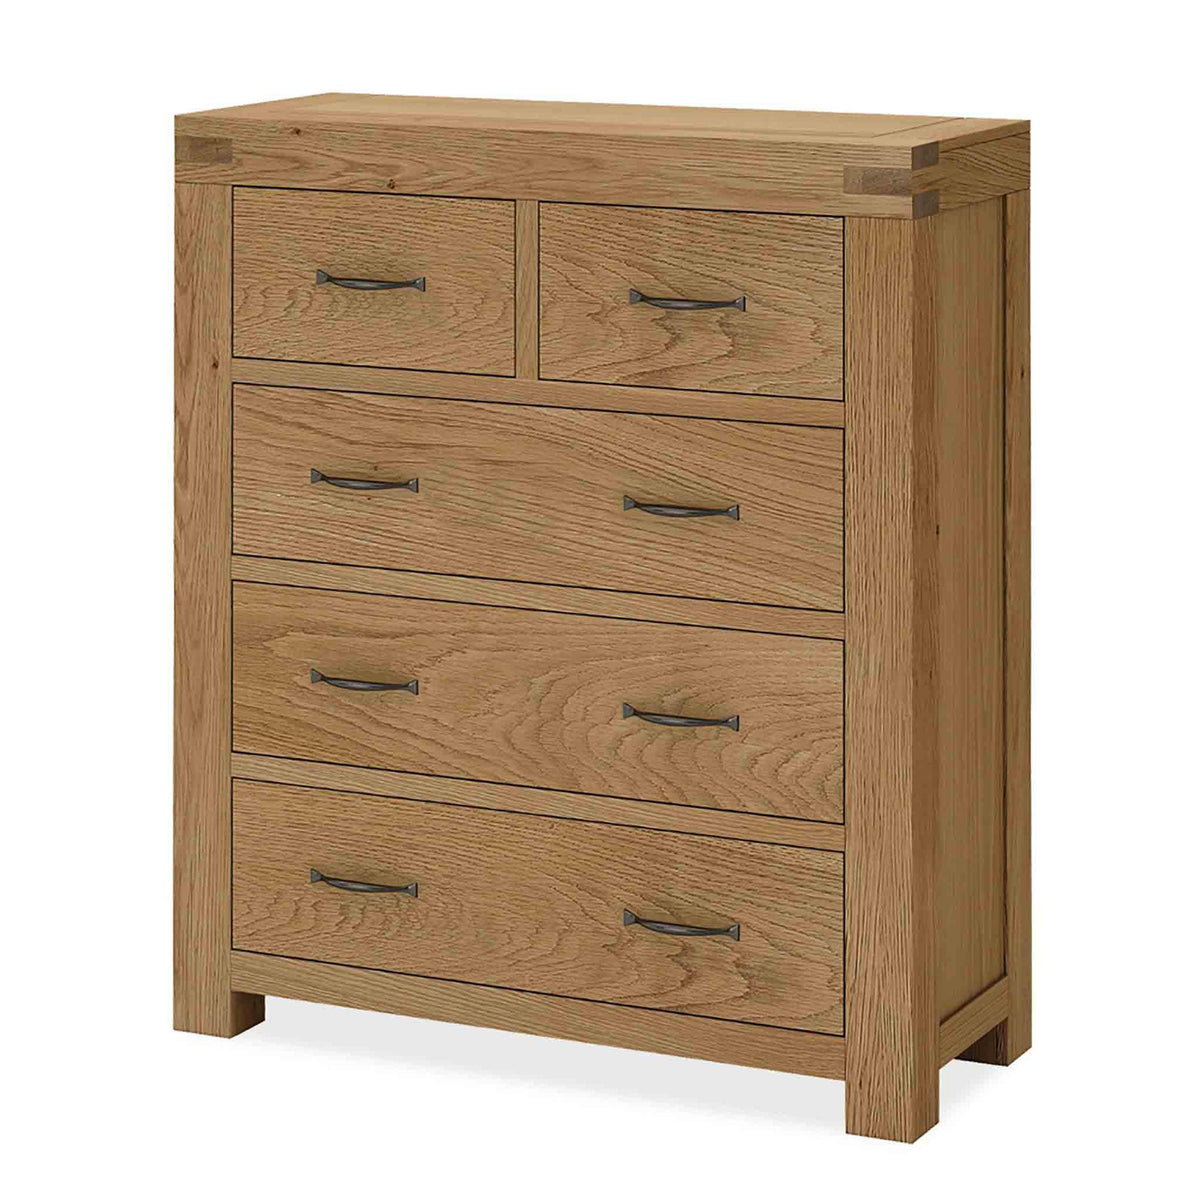 The Abbey Grande Bedroom Chest of 5 Drawers - 2 Over £ Drawers